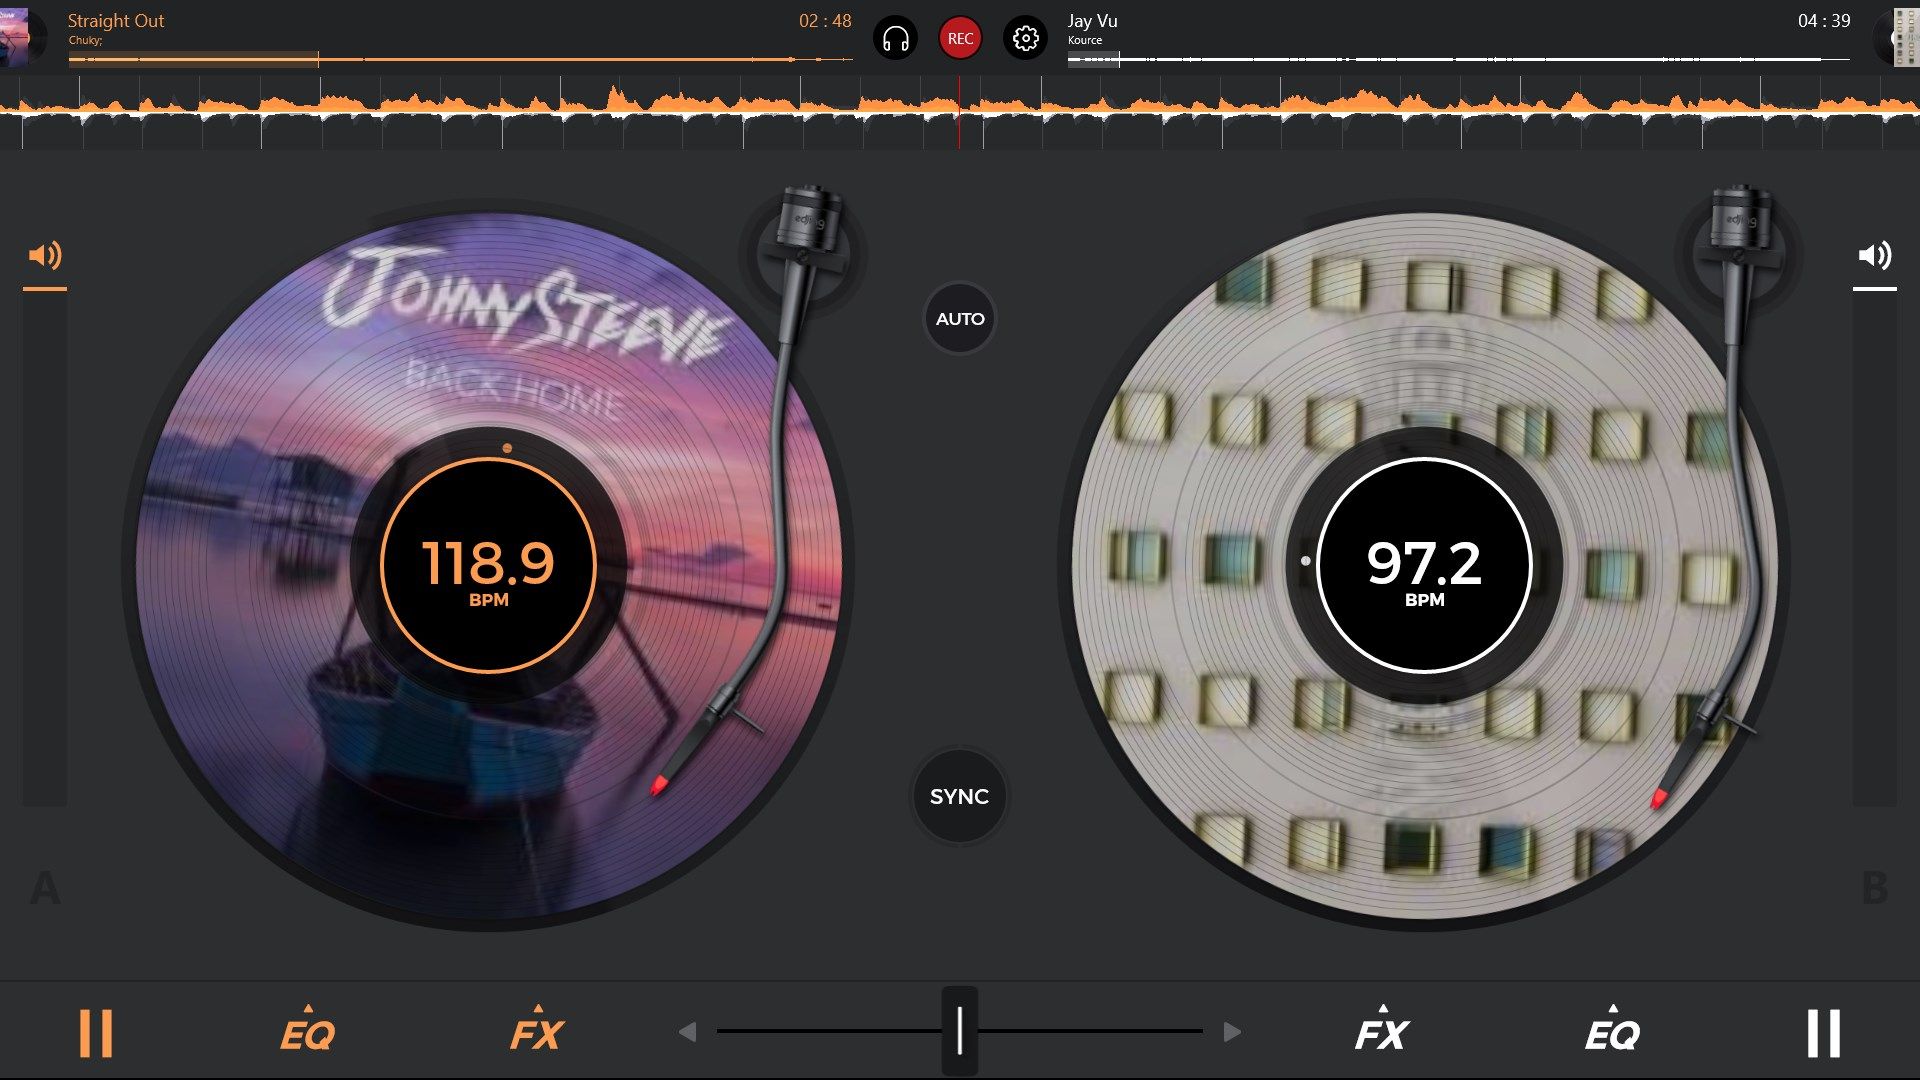 edjing 5: DJ turntable to mix and record music